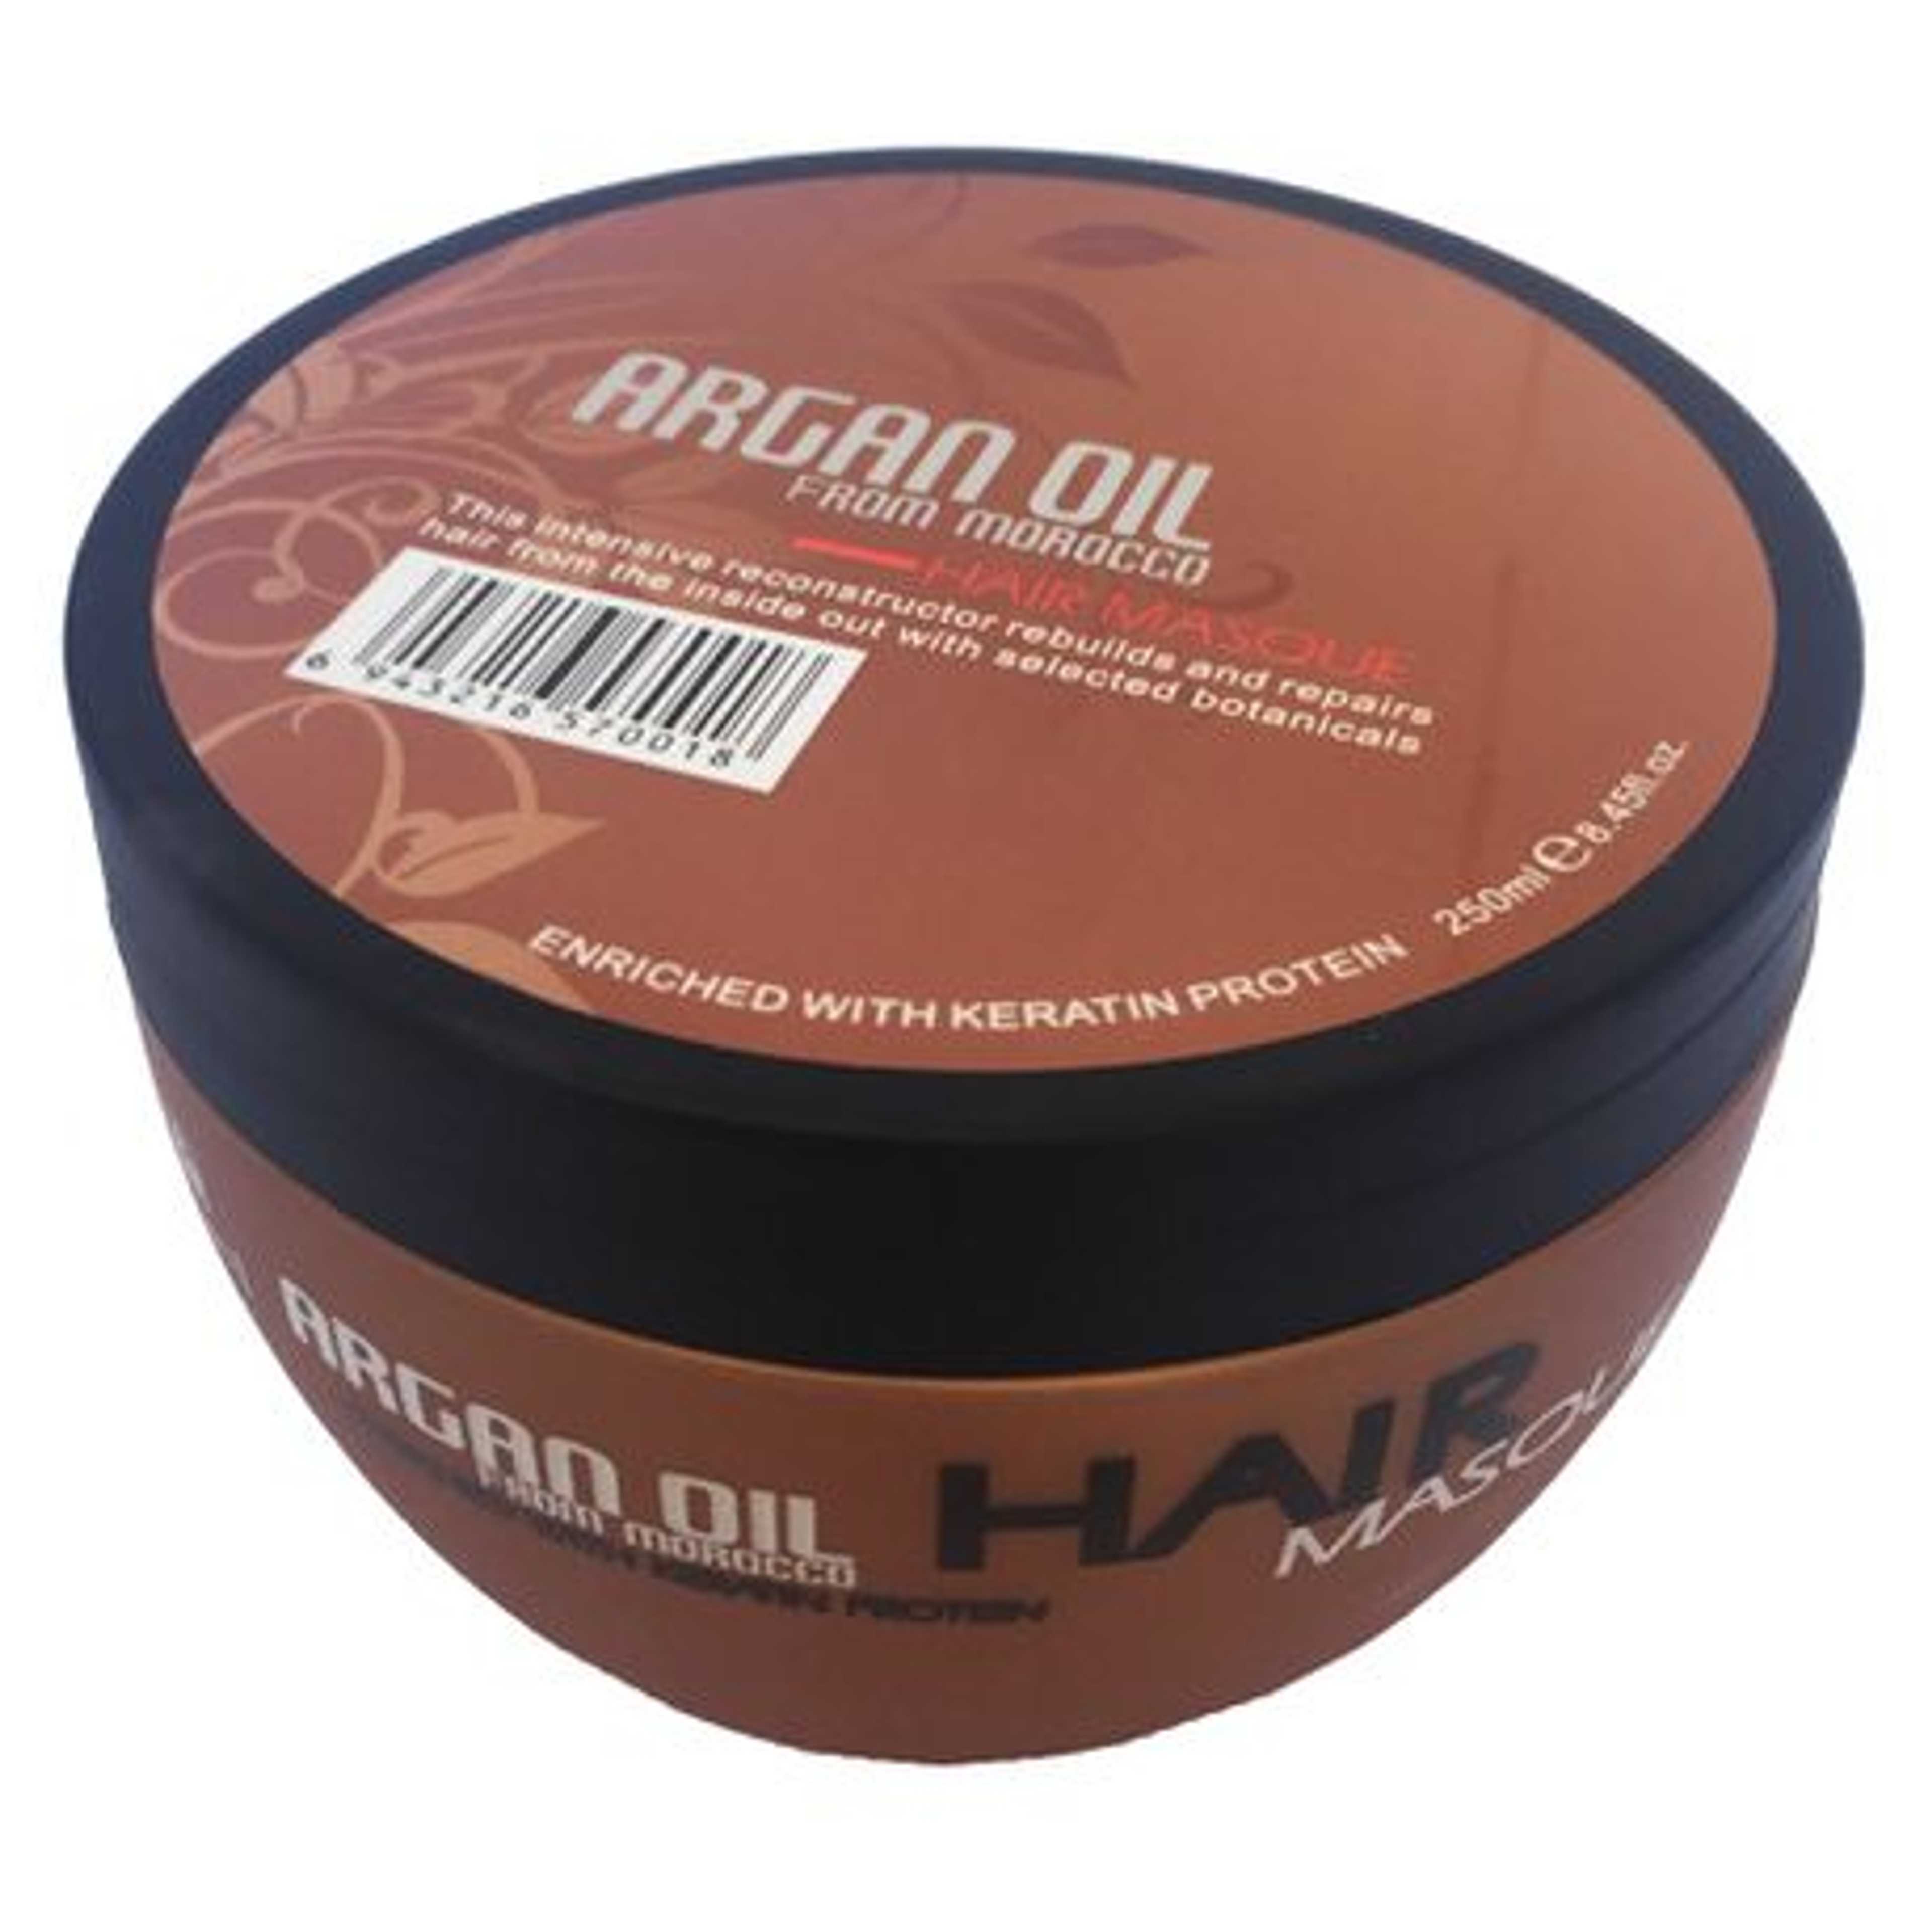 ARGAN OIL FROM MOROCCO ENRICHED WITH KERATIN PROTEIN HAIR MASQUE 250ML (Imported)